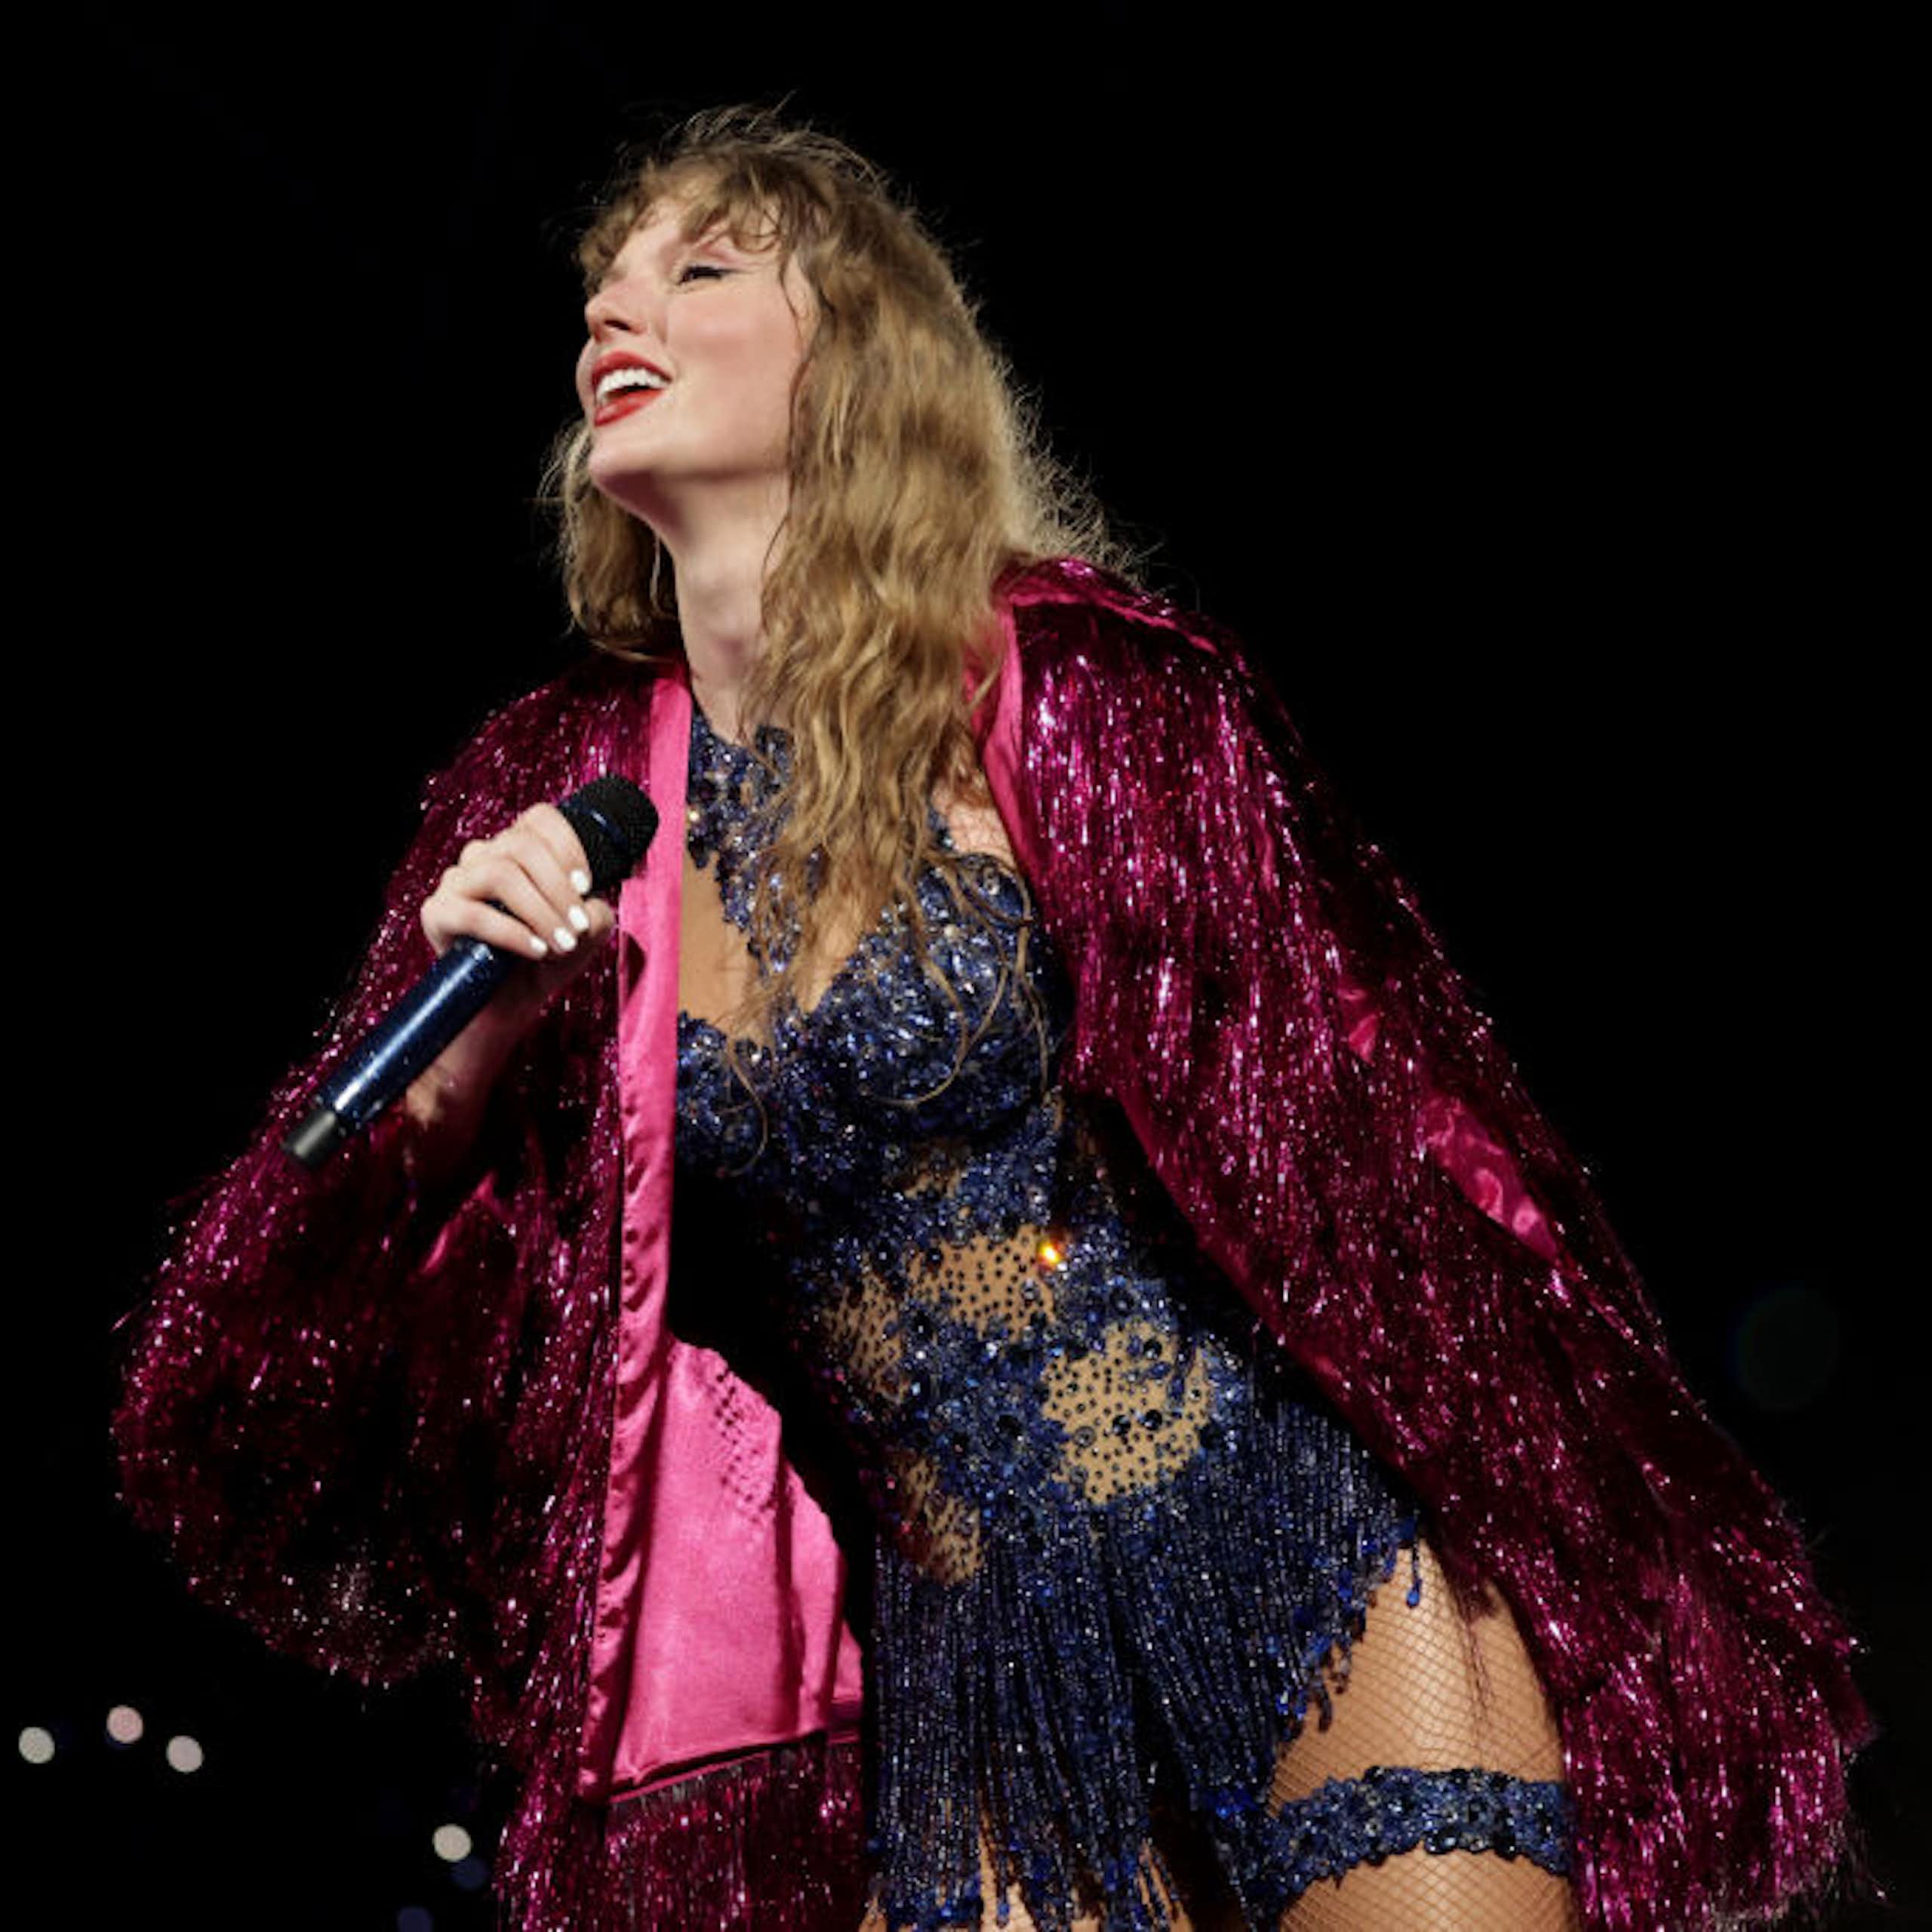 Know thyself − all too well: Why Taylor Swift’s songs are philosophy